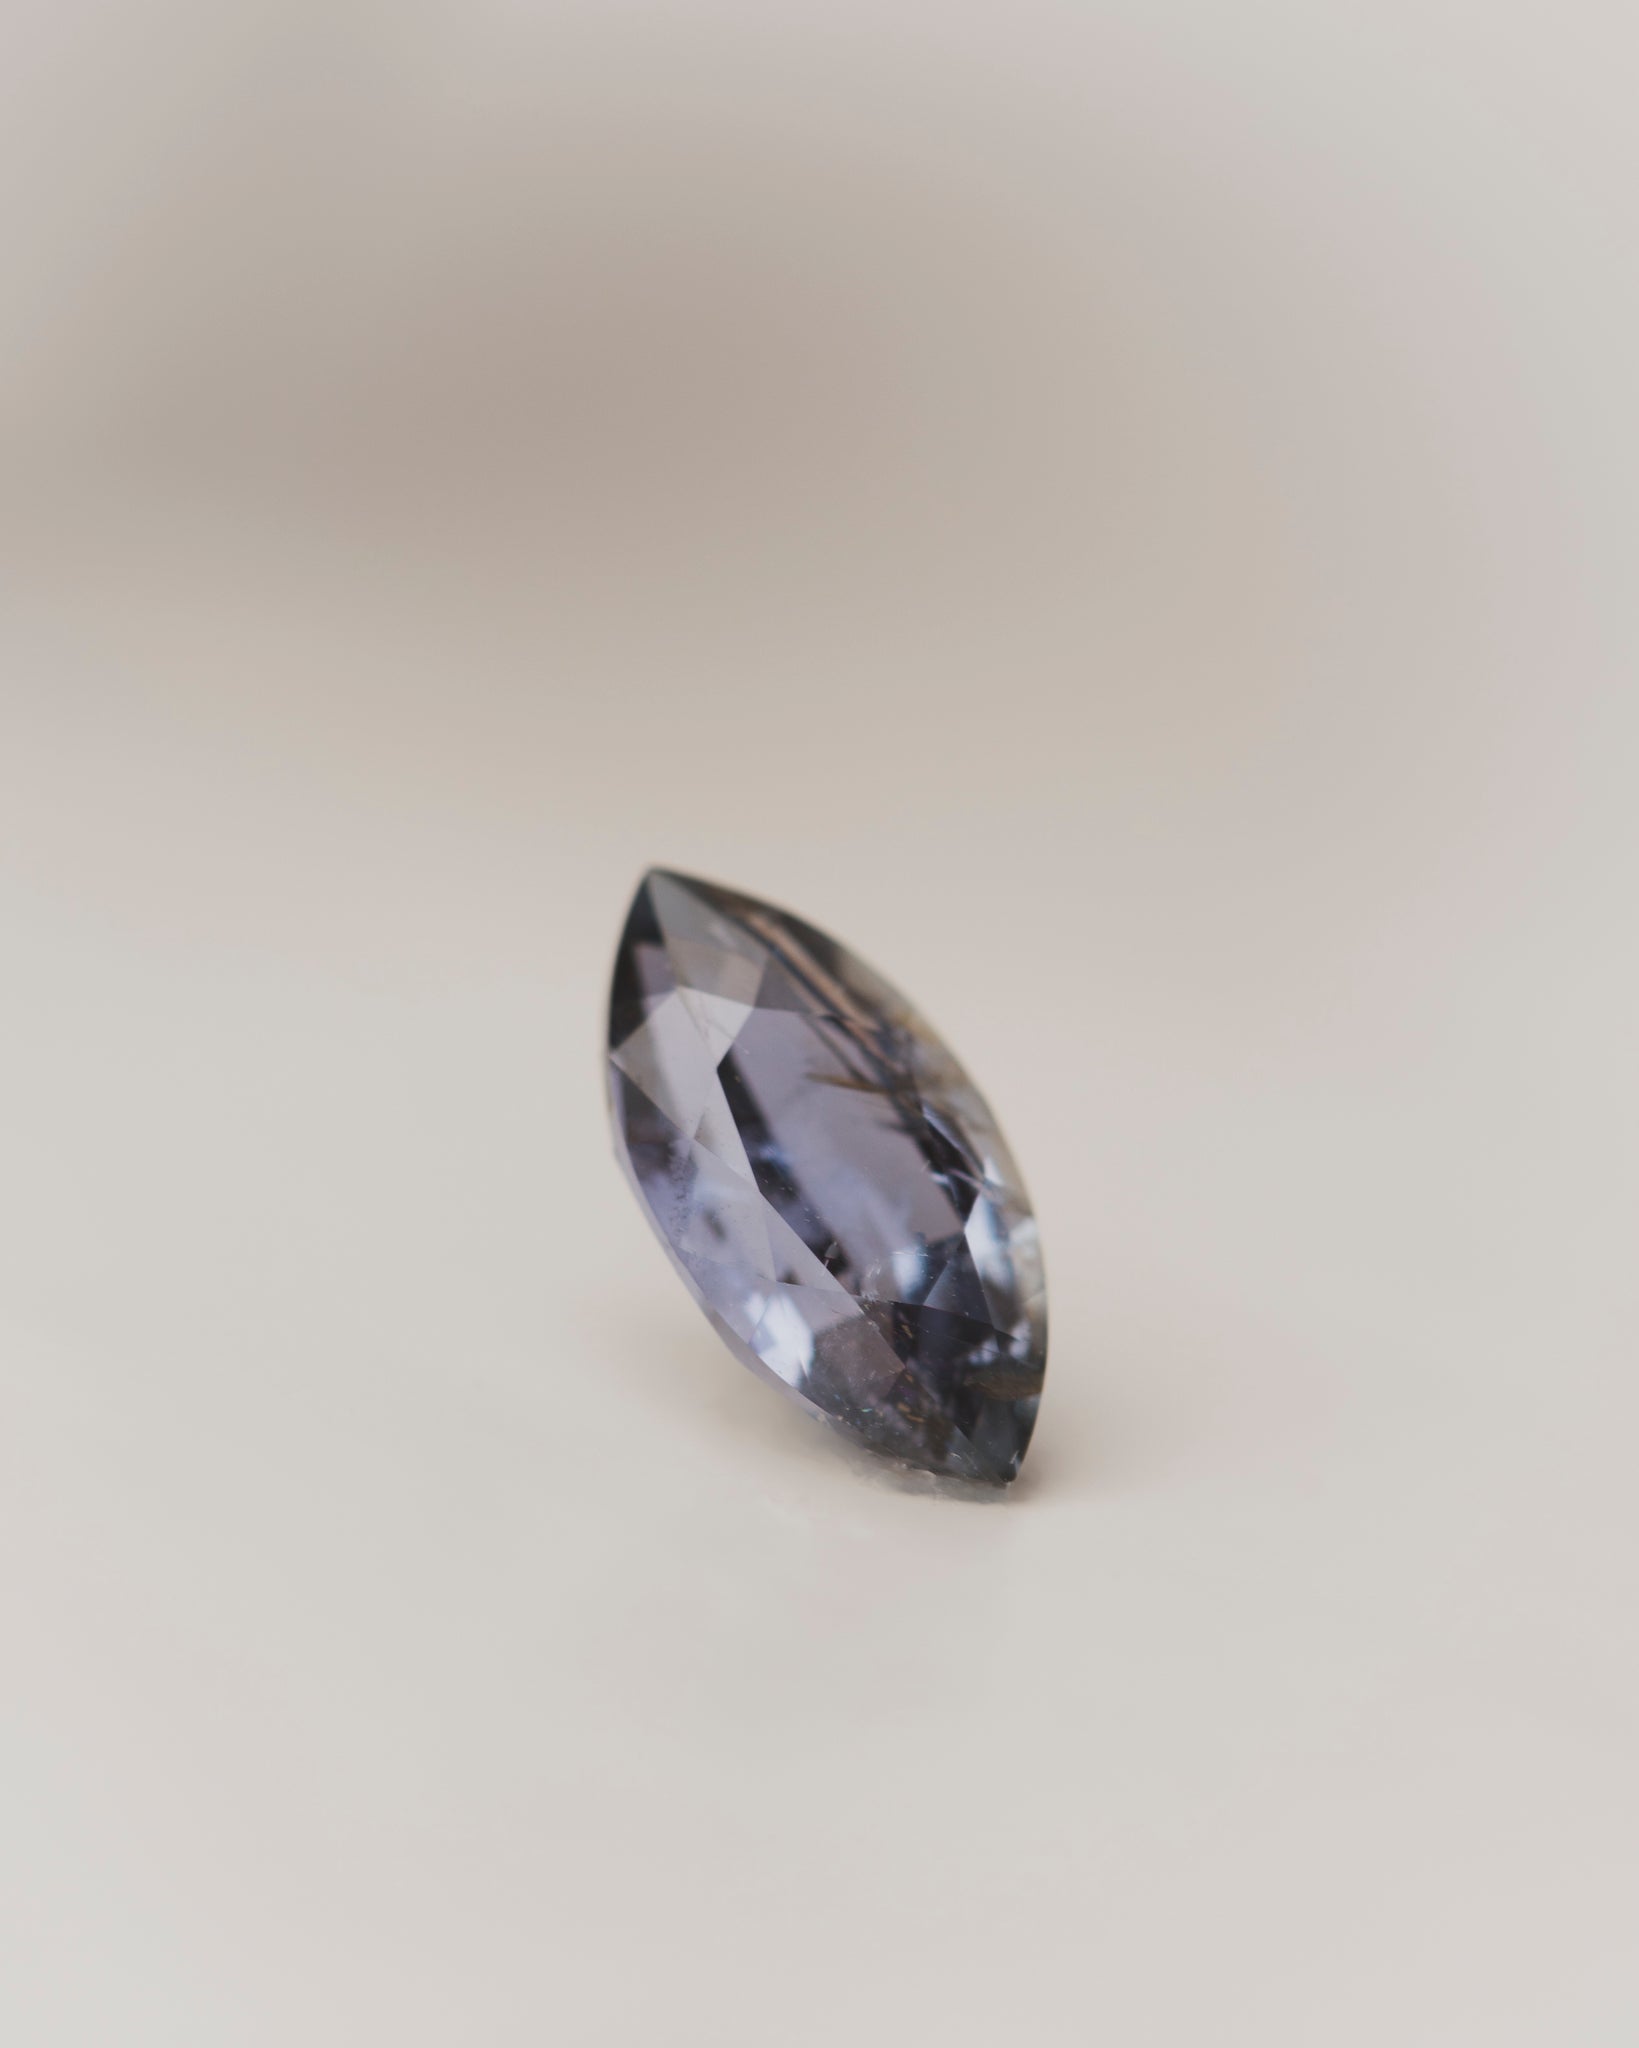 This 1.2 carat Marquise Umba Sapphire is very rare shade of purple, perfect for a custom design project